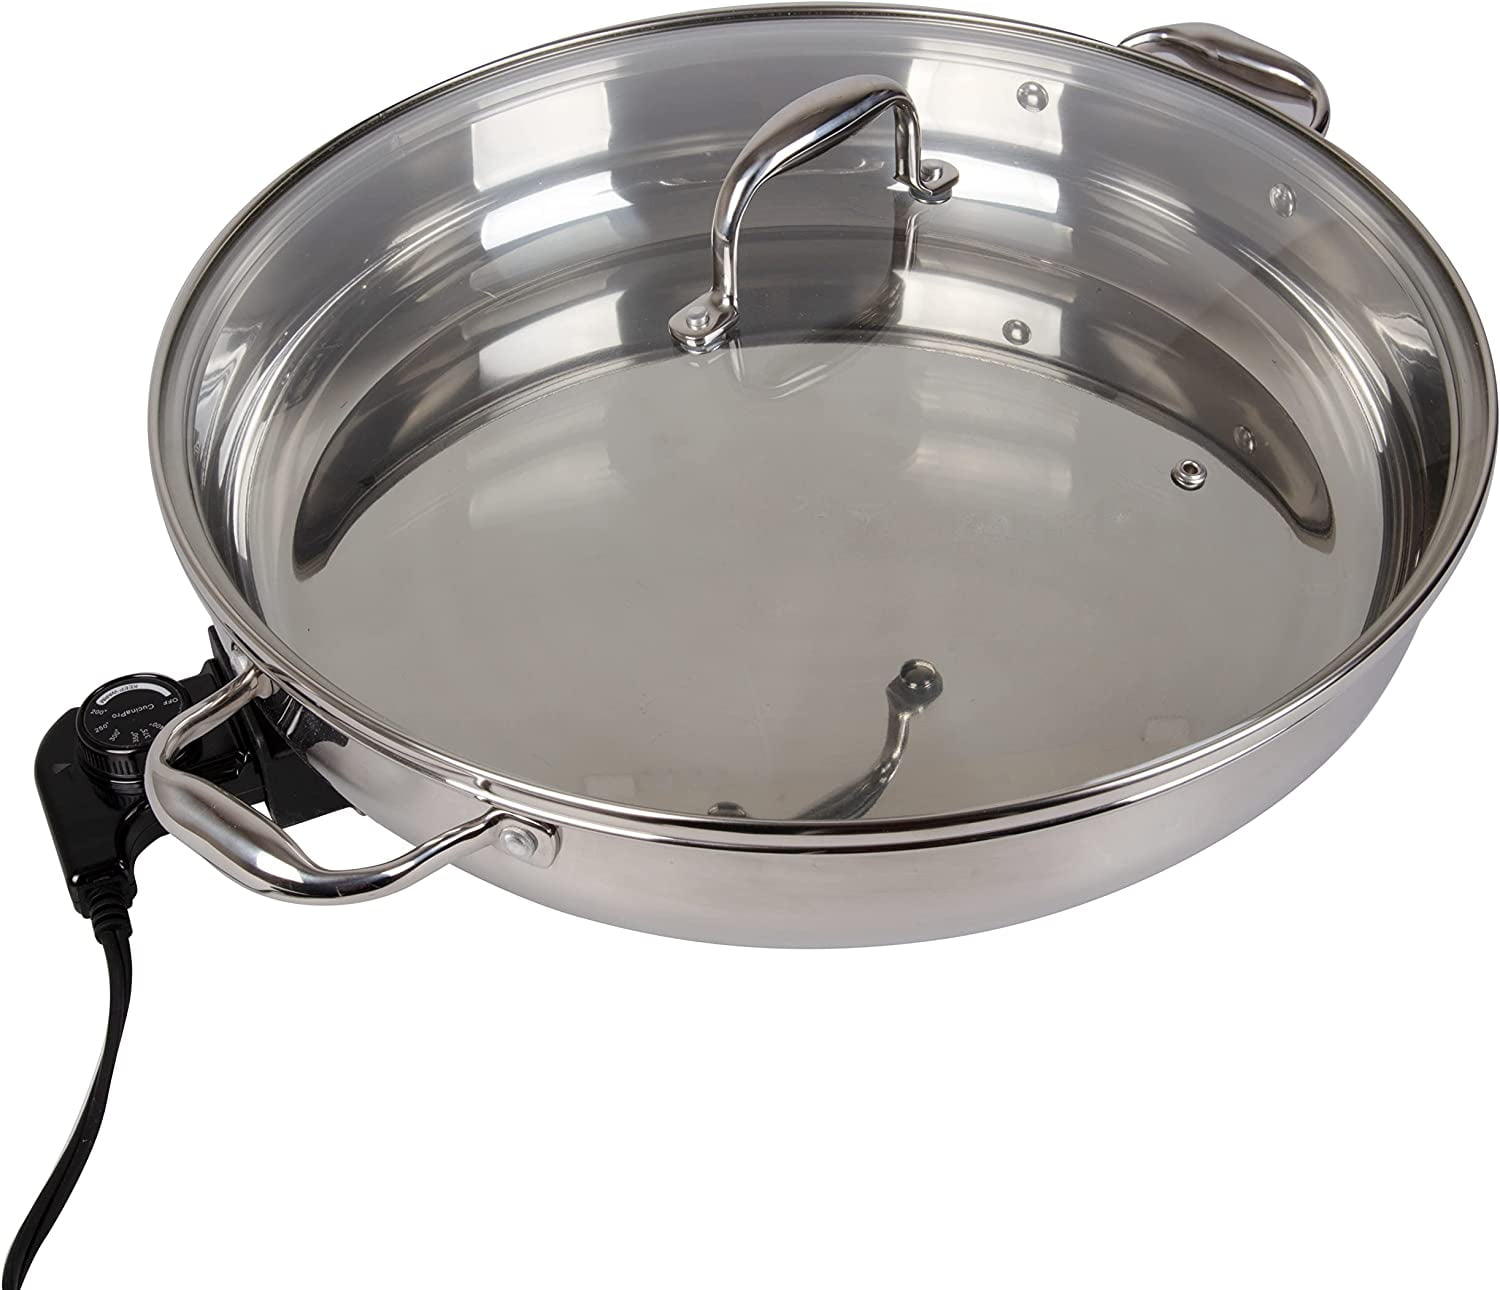 Stainless Steel Pro 10 Inch Covered Skillet